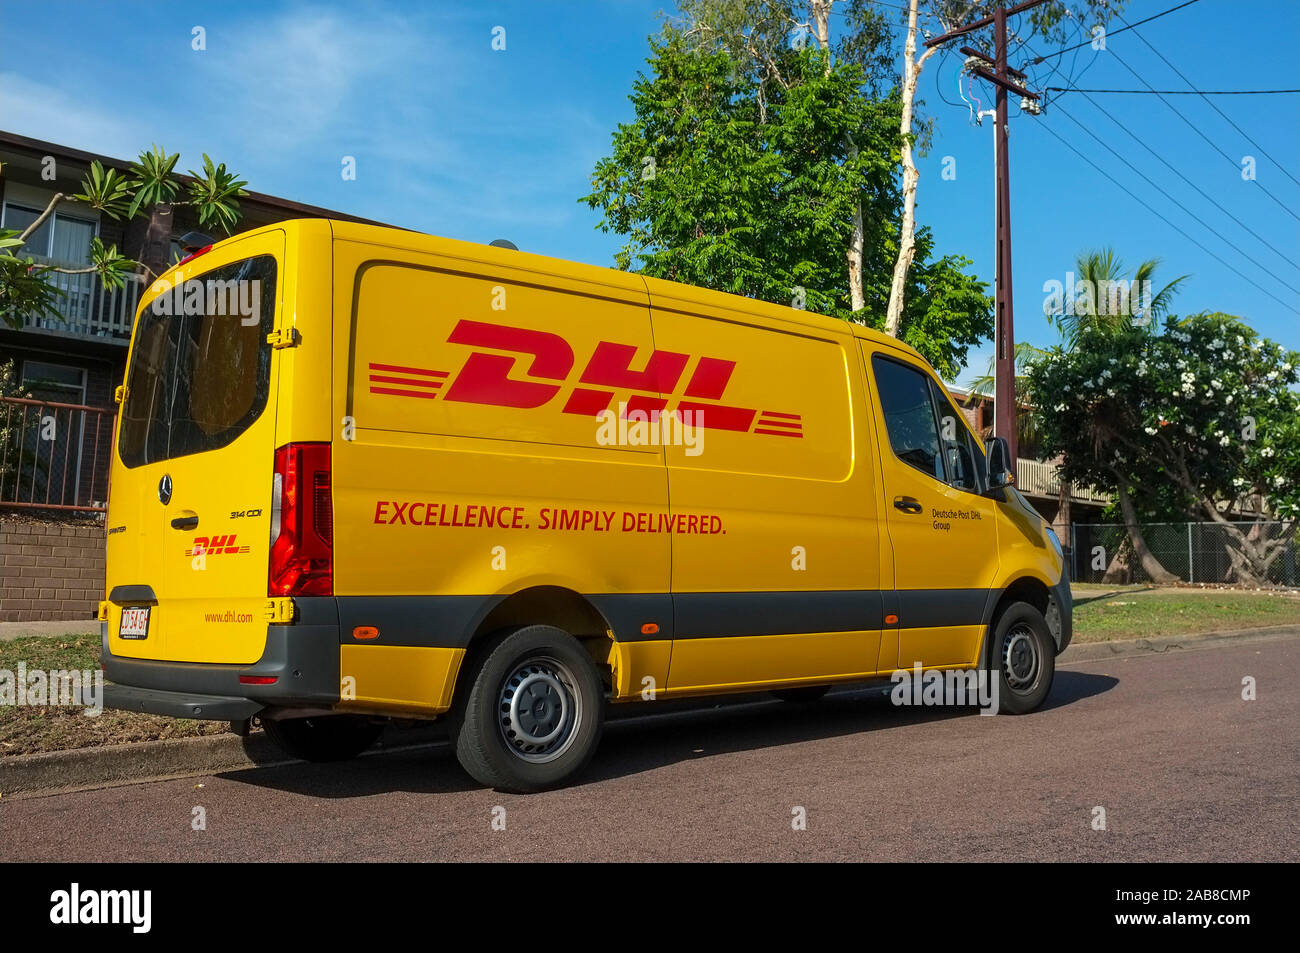 Dhl Delivery Van High Resolution Stock Photography And Images Alamy